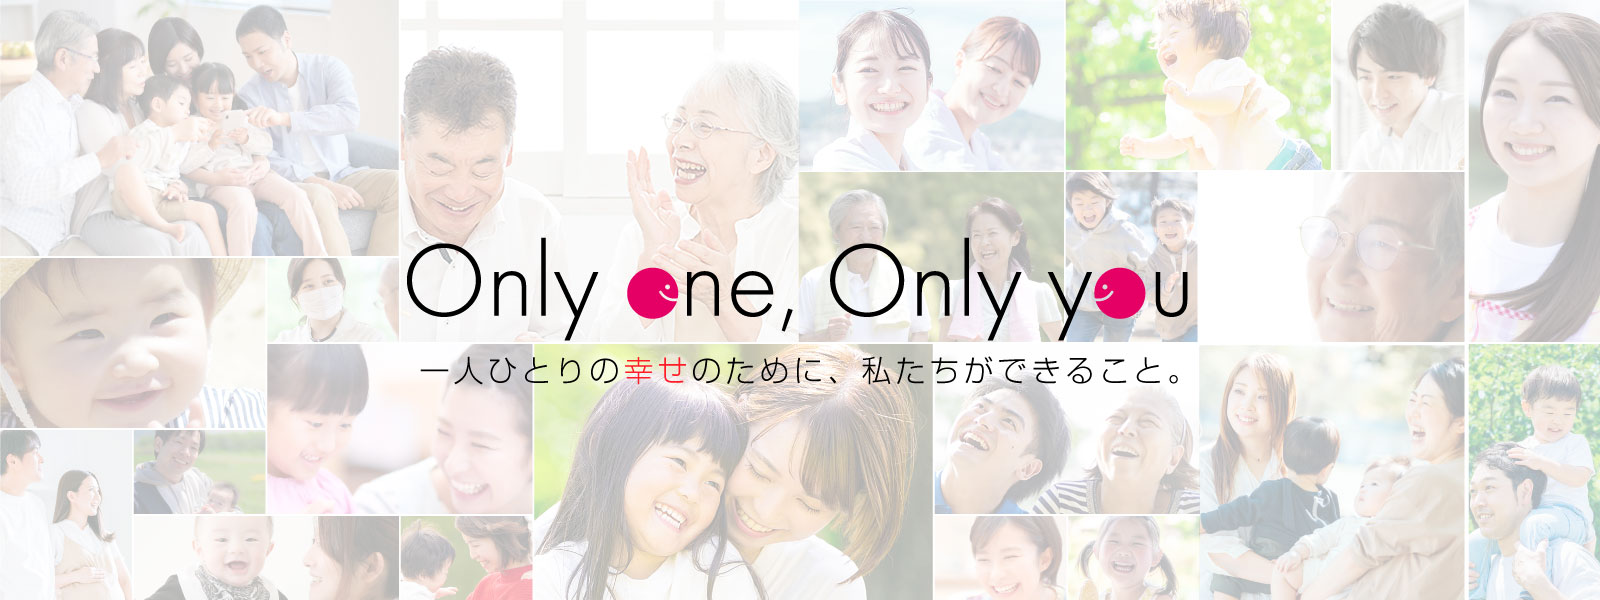 「Only one, Only you」エクセレントケアシステムのビジョン